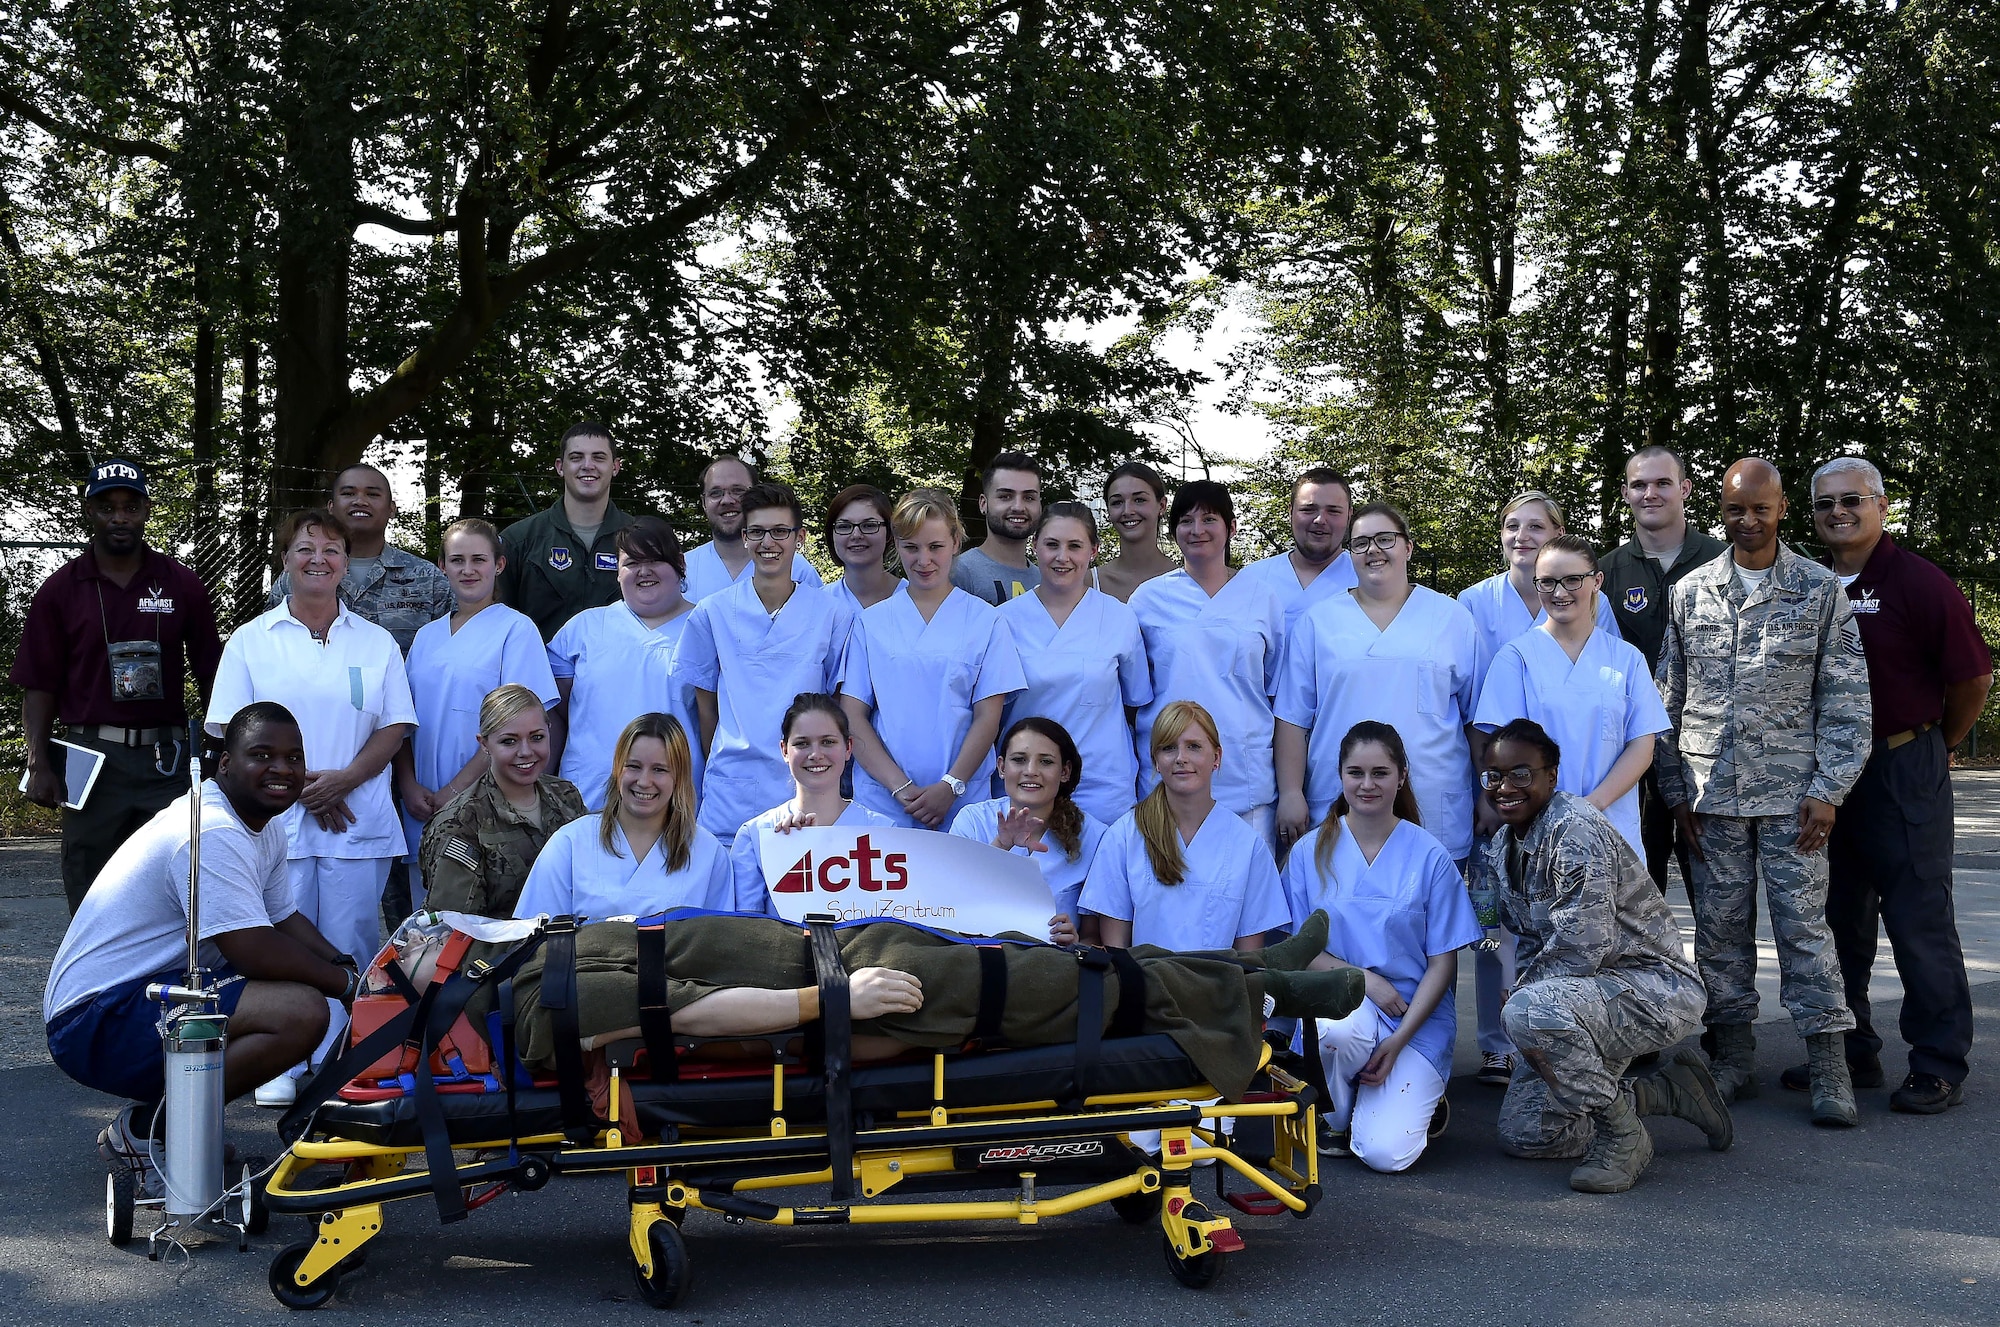 Nursing students from Caritas SchulZentrum St. Hildegard, Saarbrücken, Germany, along with medics from the 86th Aeromedical Evacuation Squadron, and 86th Medical Group simulation team members pose for a photo after a simulated mass casualty training scenario at Ramstein Air Base, Germany, Sept. 13, 2016. The visit allowed the students to learn opportunities where Air Force nurses can incorporate their skillsets and training in an environment outside of the traditional clinical setting. (U.S. Air Force photo by Senior Airman Jonathan Bass)